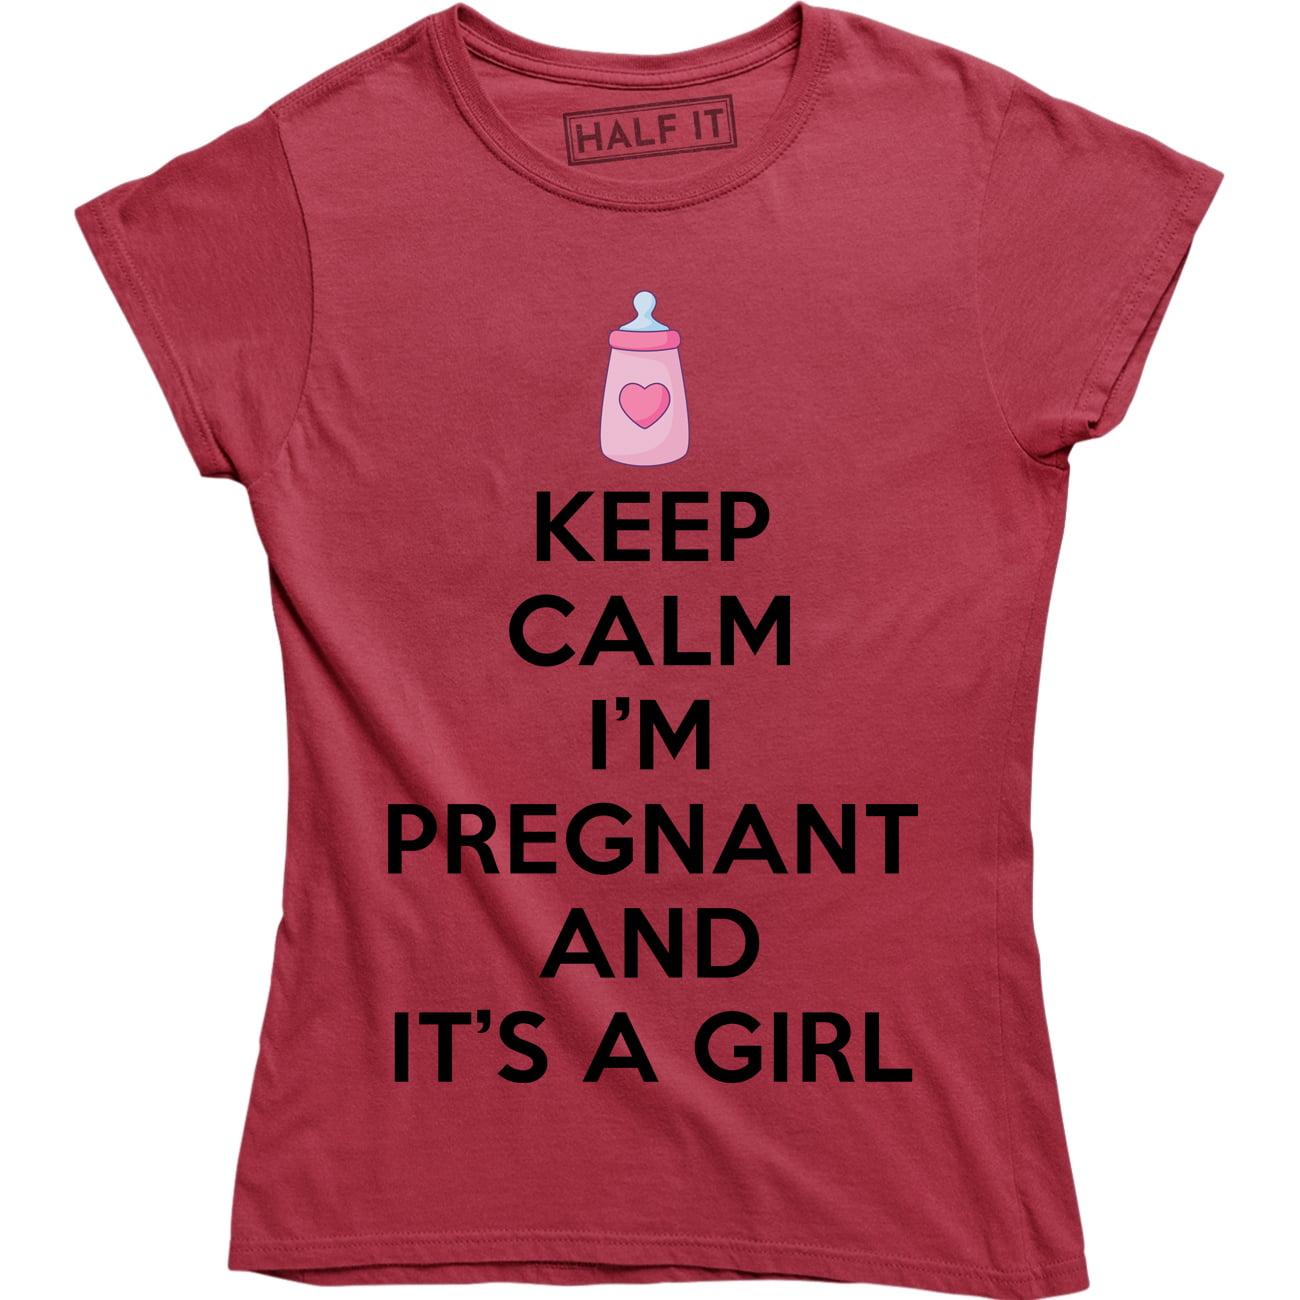 Half It - Keep Calm I'm Pregnant And It's A Girl Funny Maternity ...